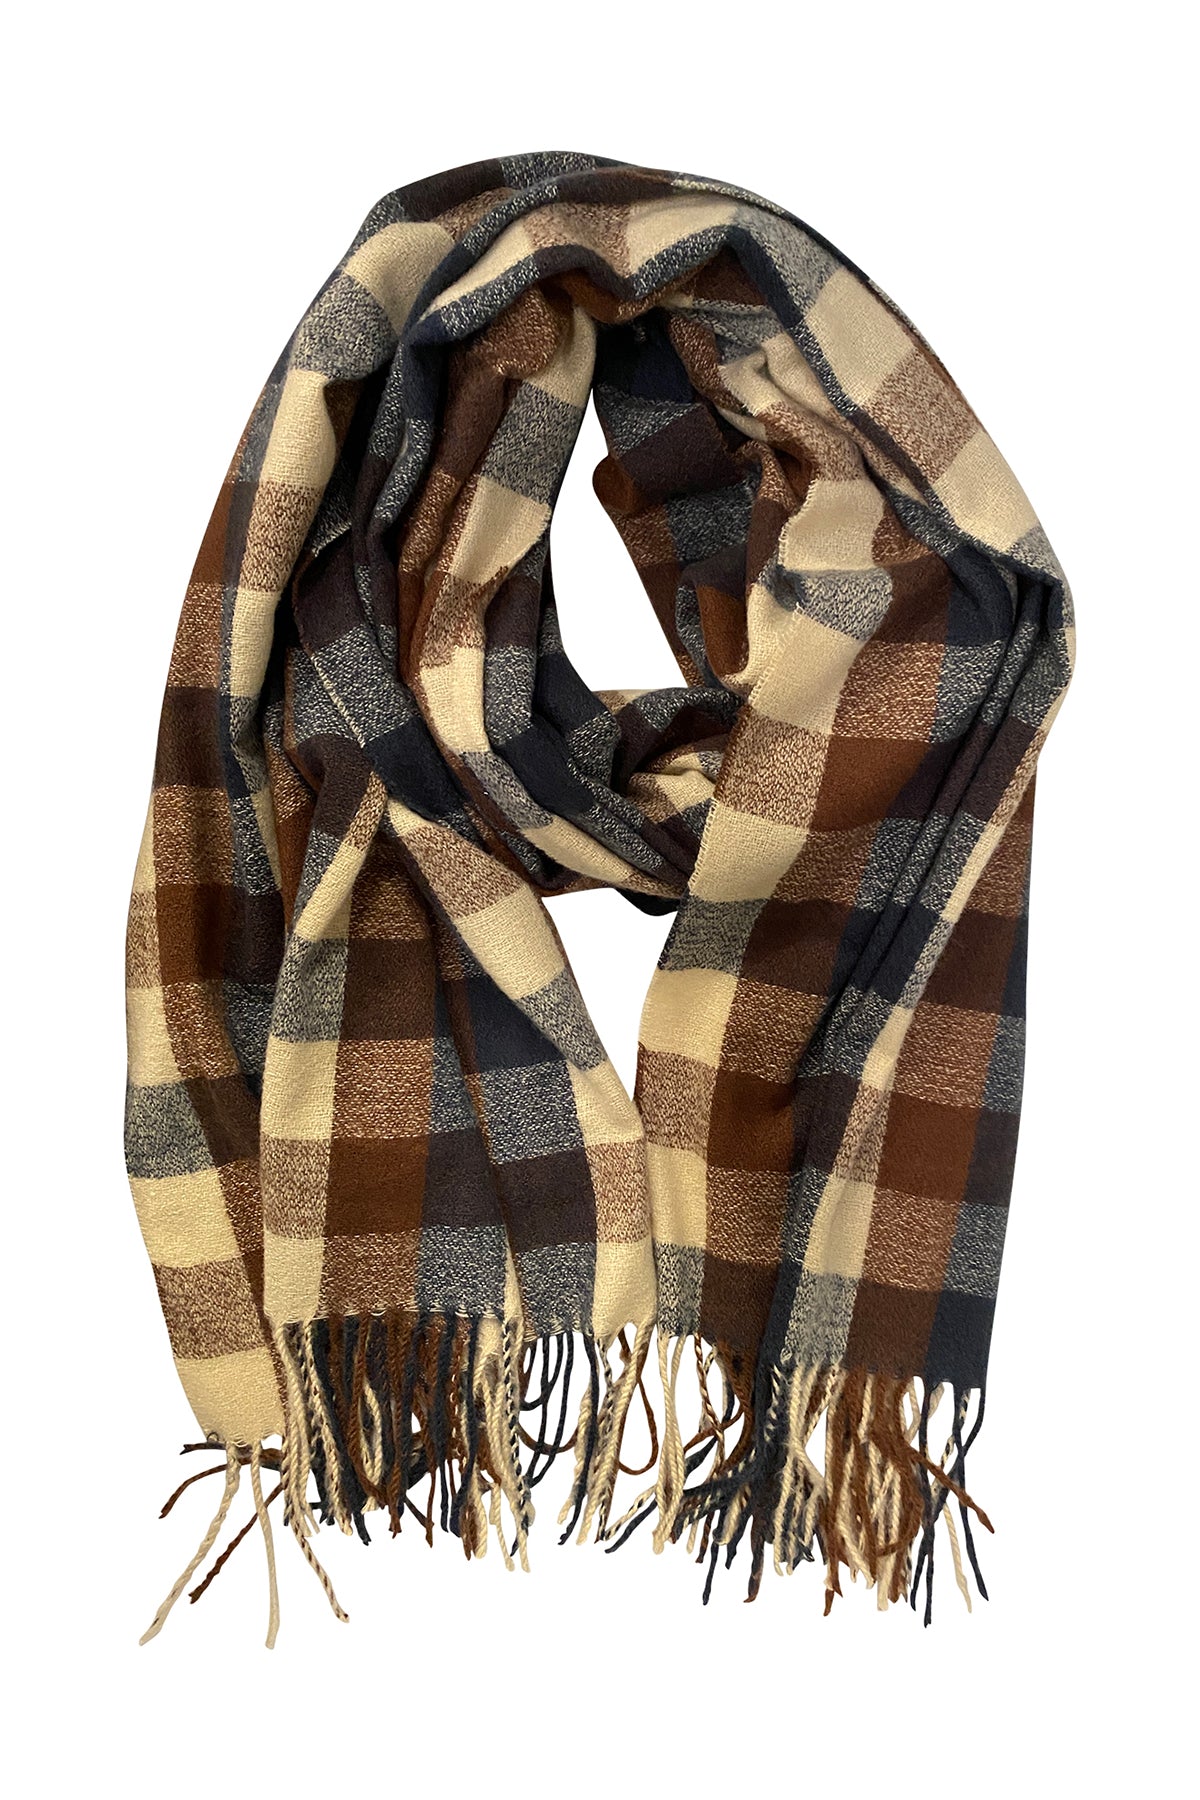   Buffalo Check Scarf in Navy, Brown, and Cream 